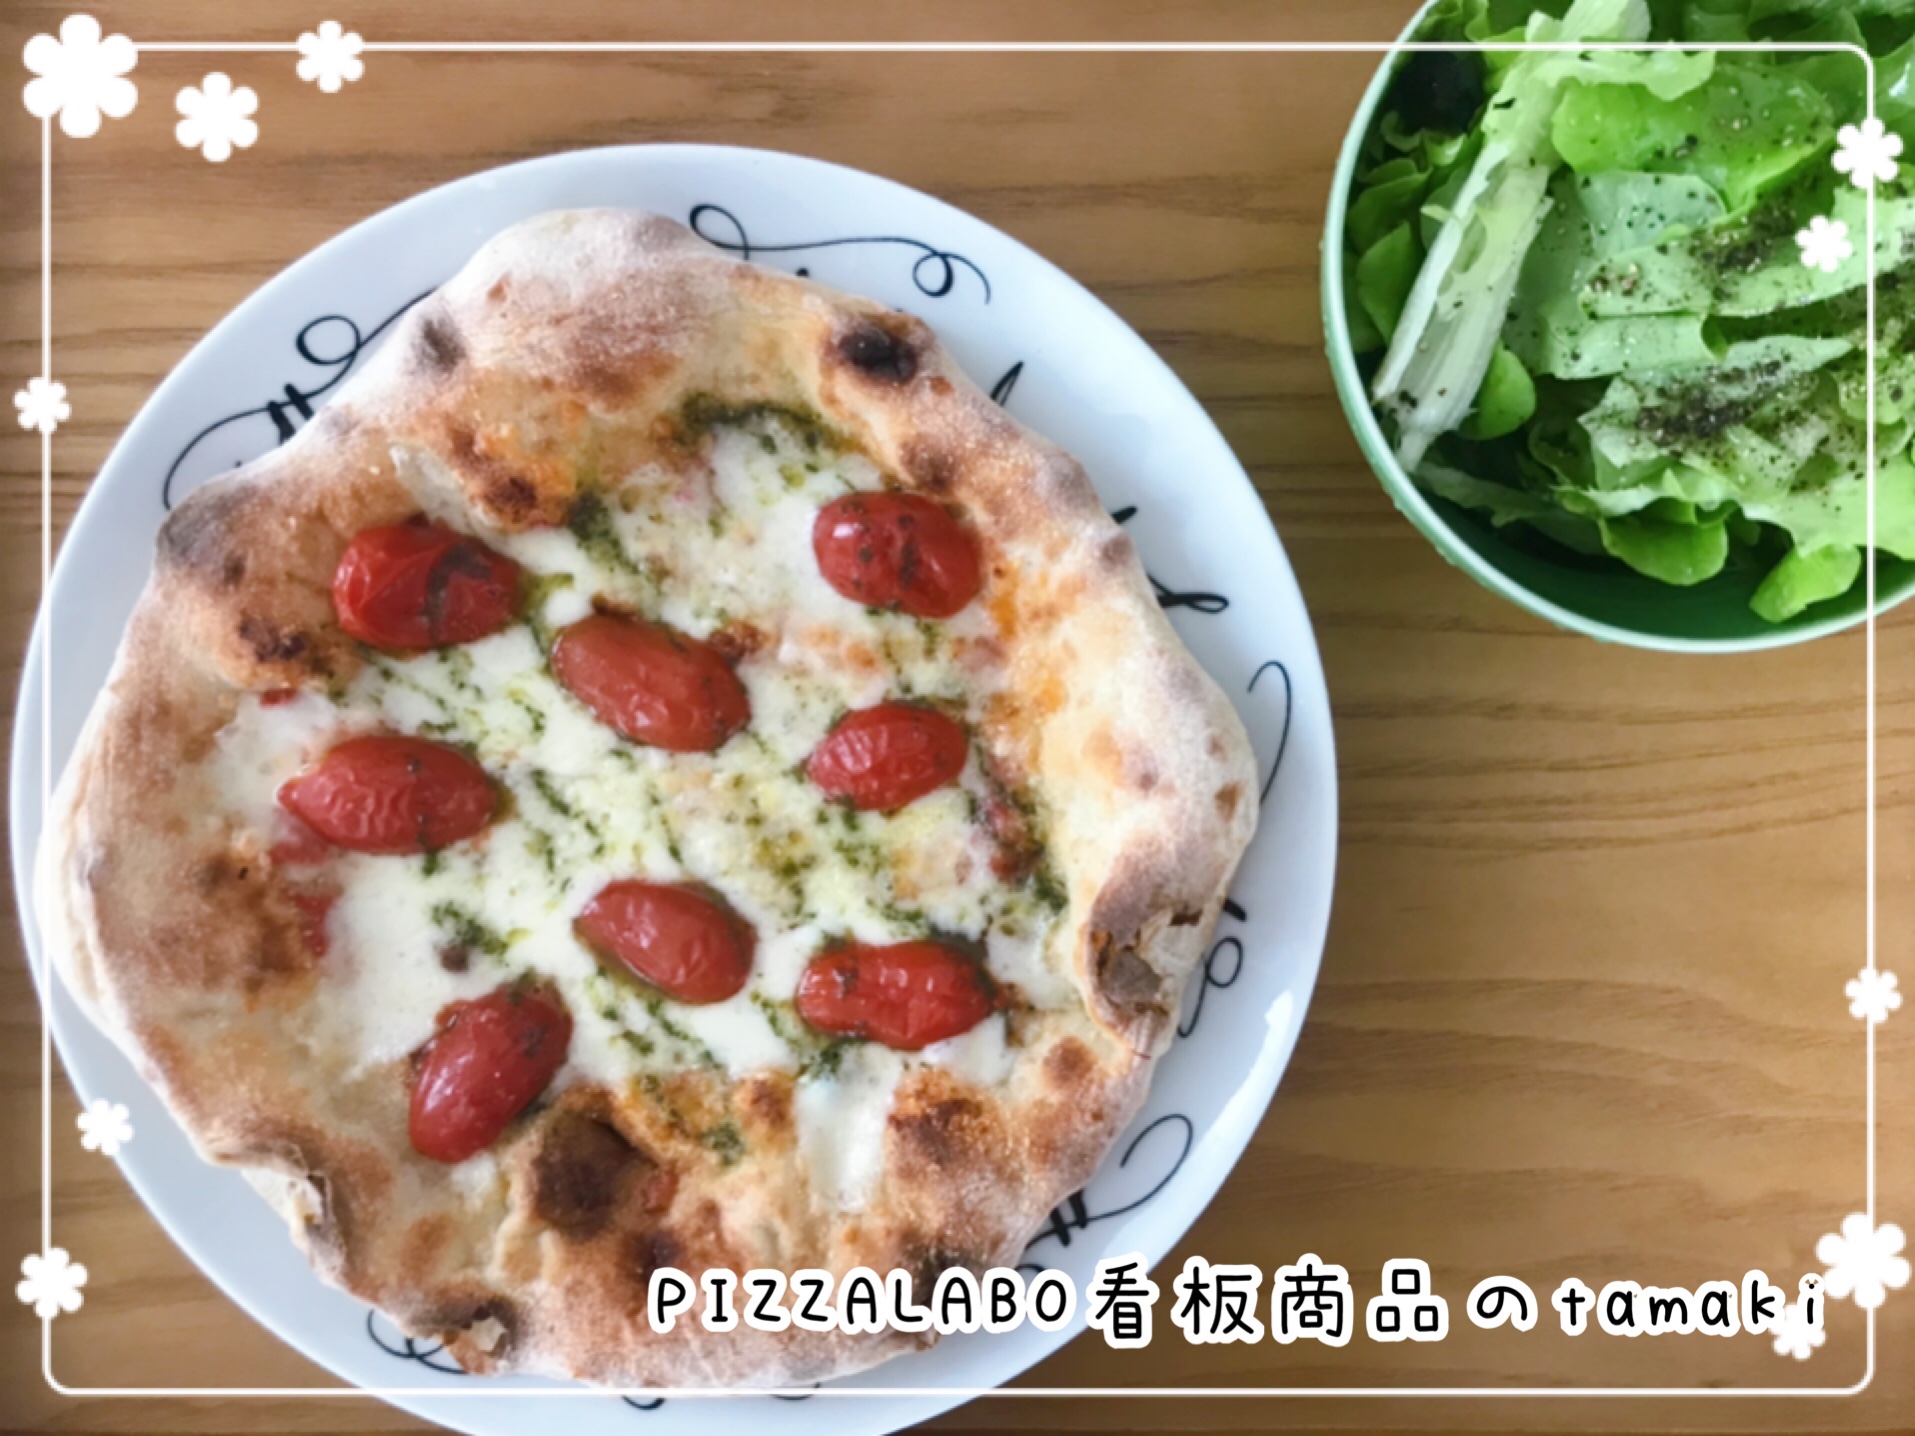 PIZZALABOの冷凍ピザ